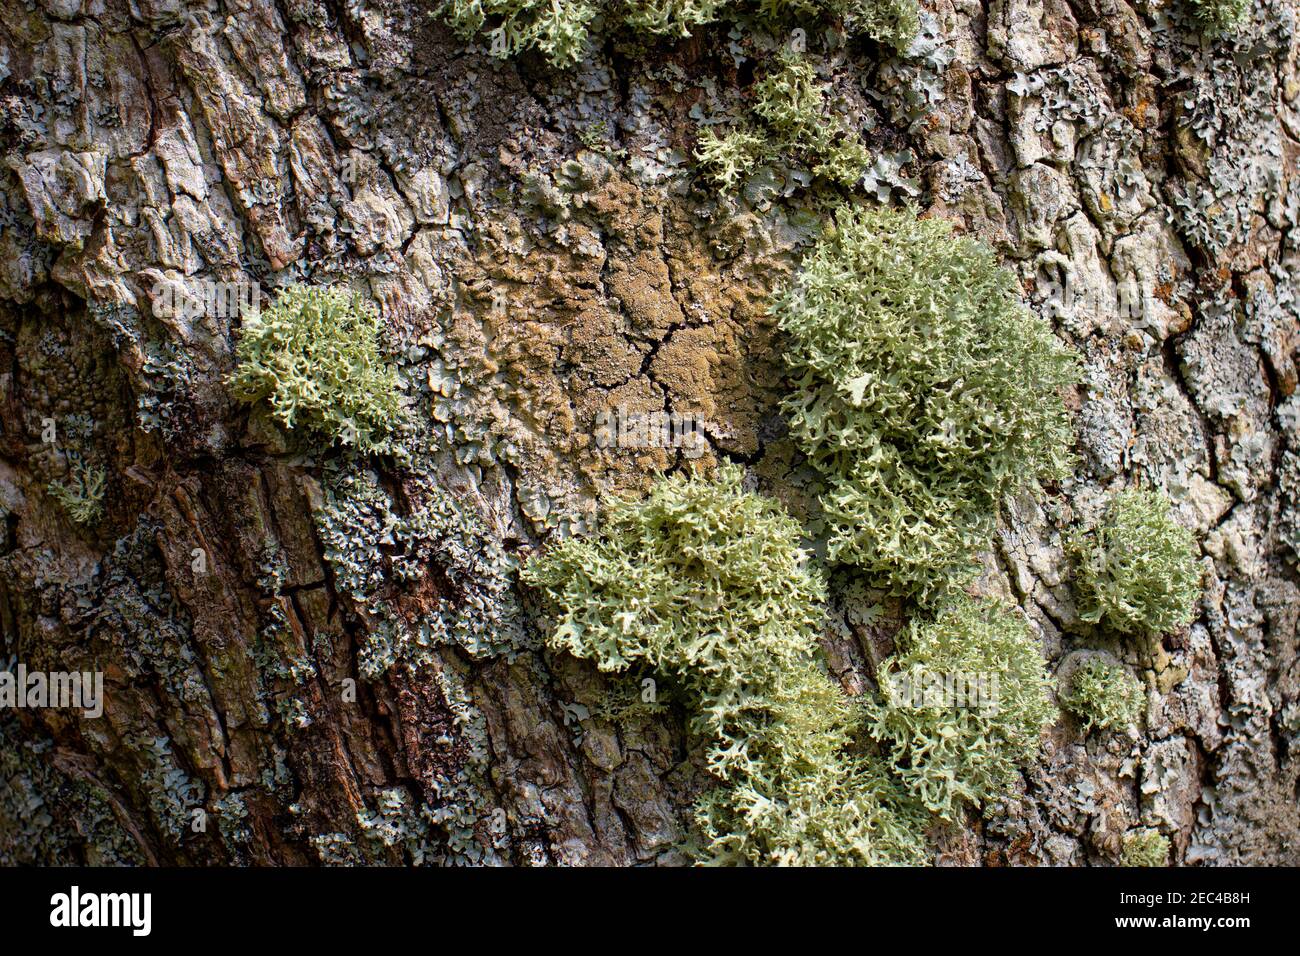 Green lichen growing on rough brown tree bark Stock Photo